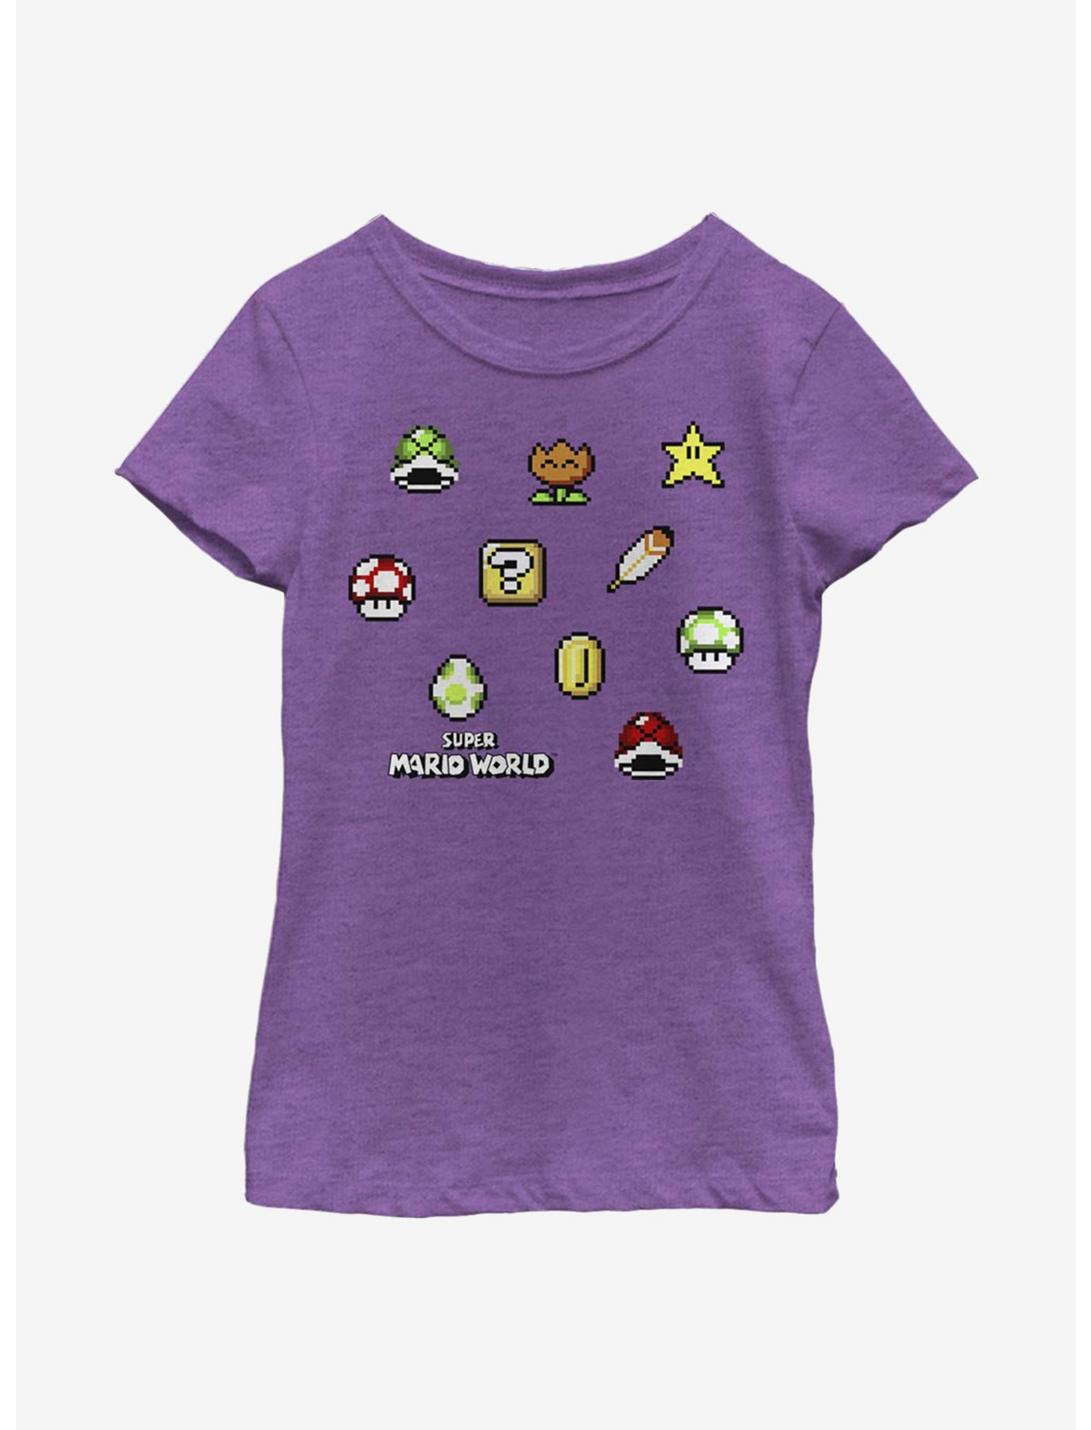 Nintendo Super Mario Maker Items Scatter Youth Girls T-Shirt, PURPLE BERRY, hi-res